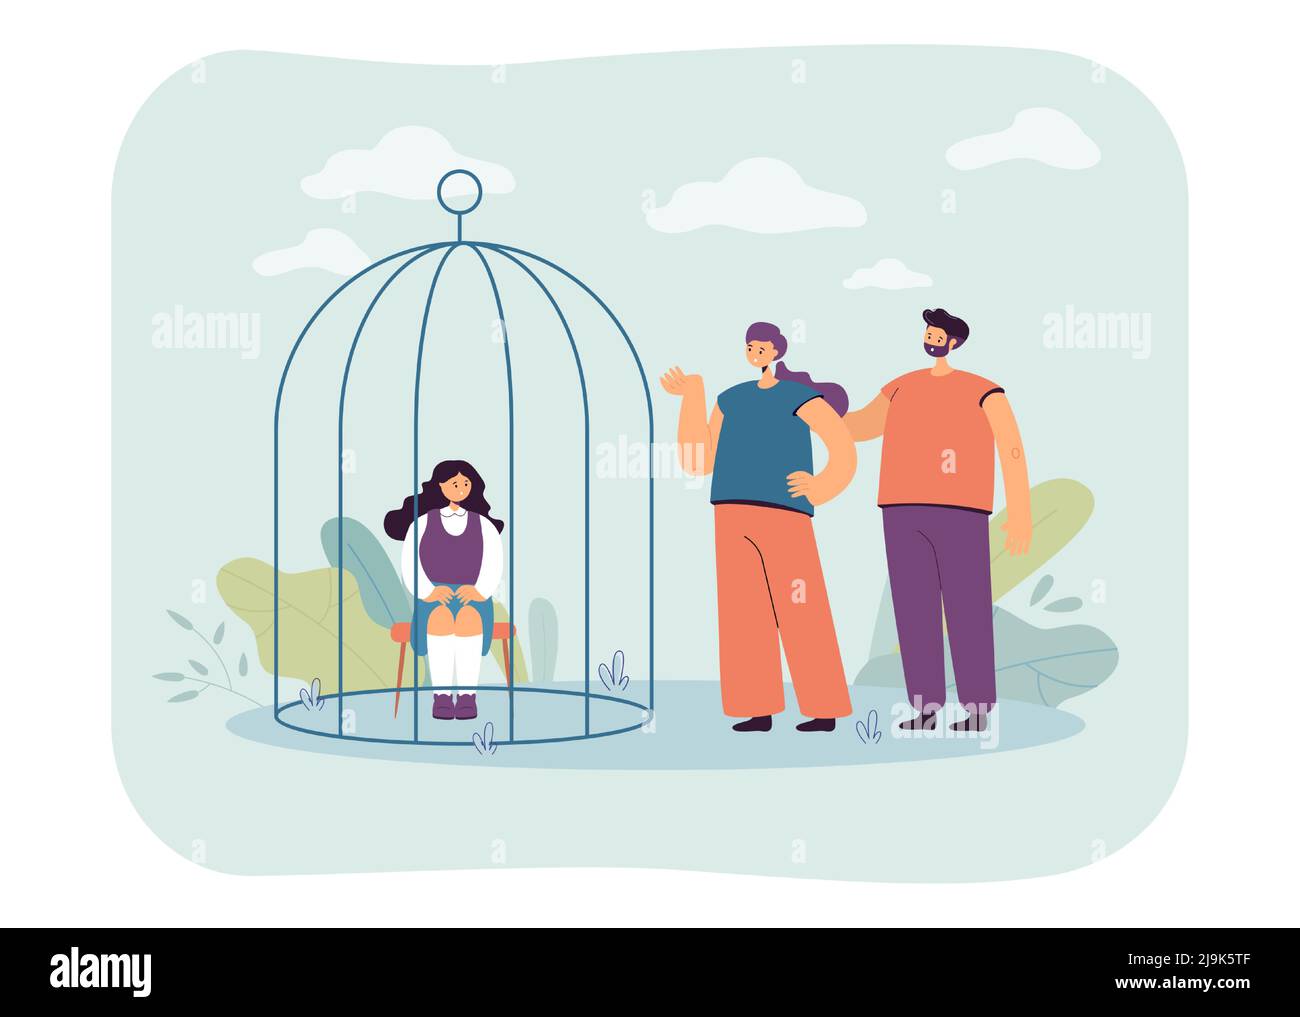 Daughter sitting in cage for bad deed flat vector illustration. Mother and father punishing kid for misbehaving. Parenthood, discipline, family concep Stock Vector